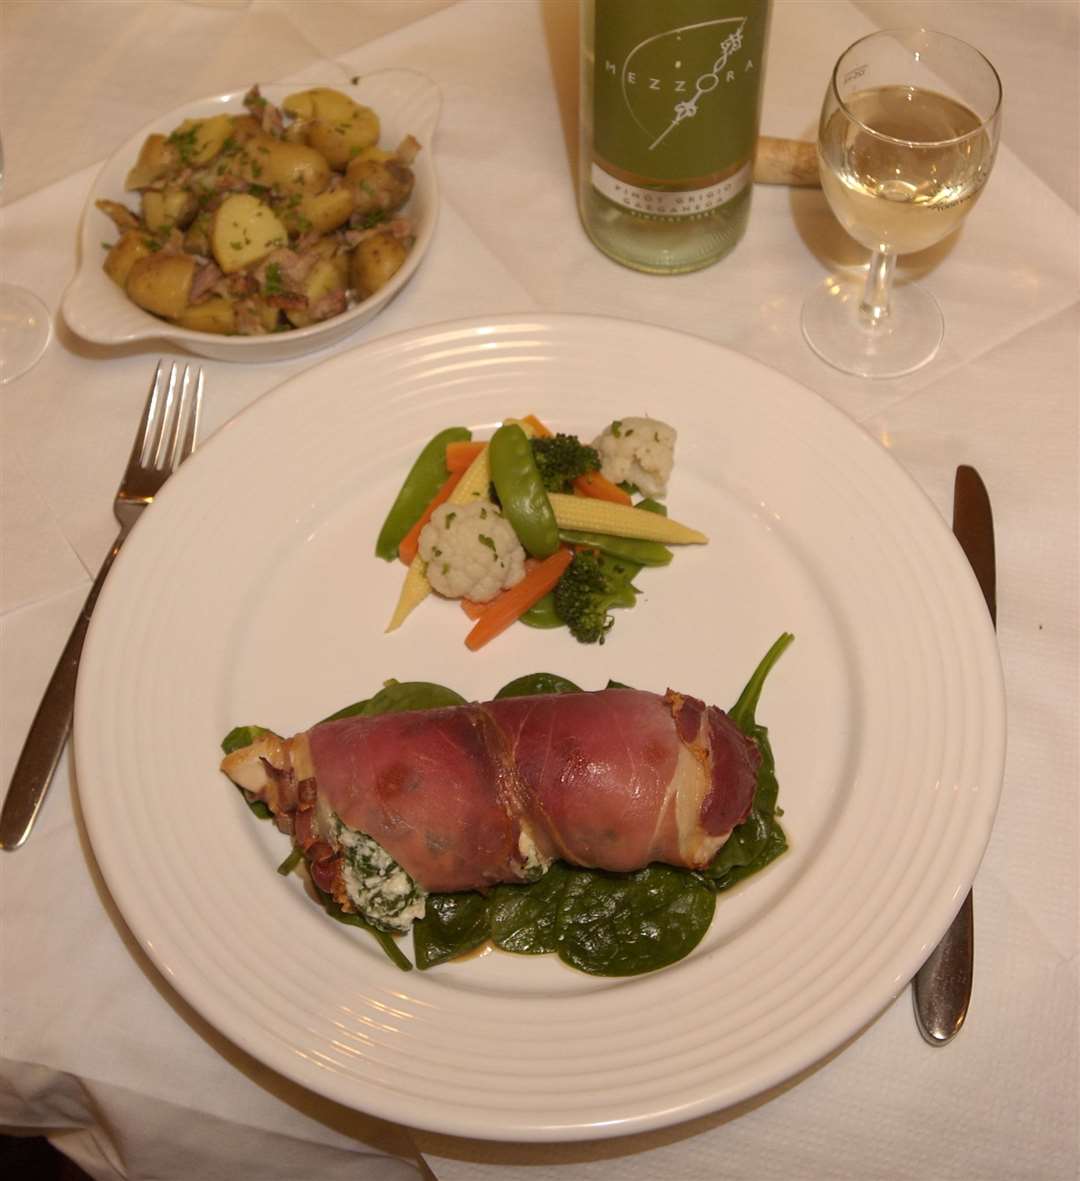 One of the meals on offer in 2005 - chicken breast stuffed with spinach and ricotta cheese